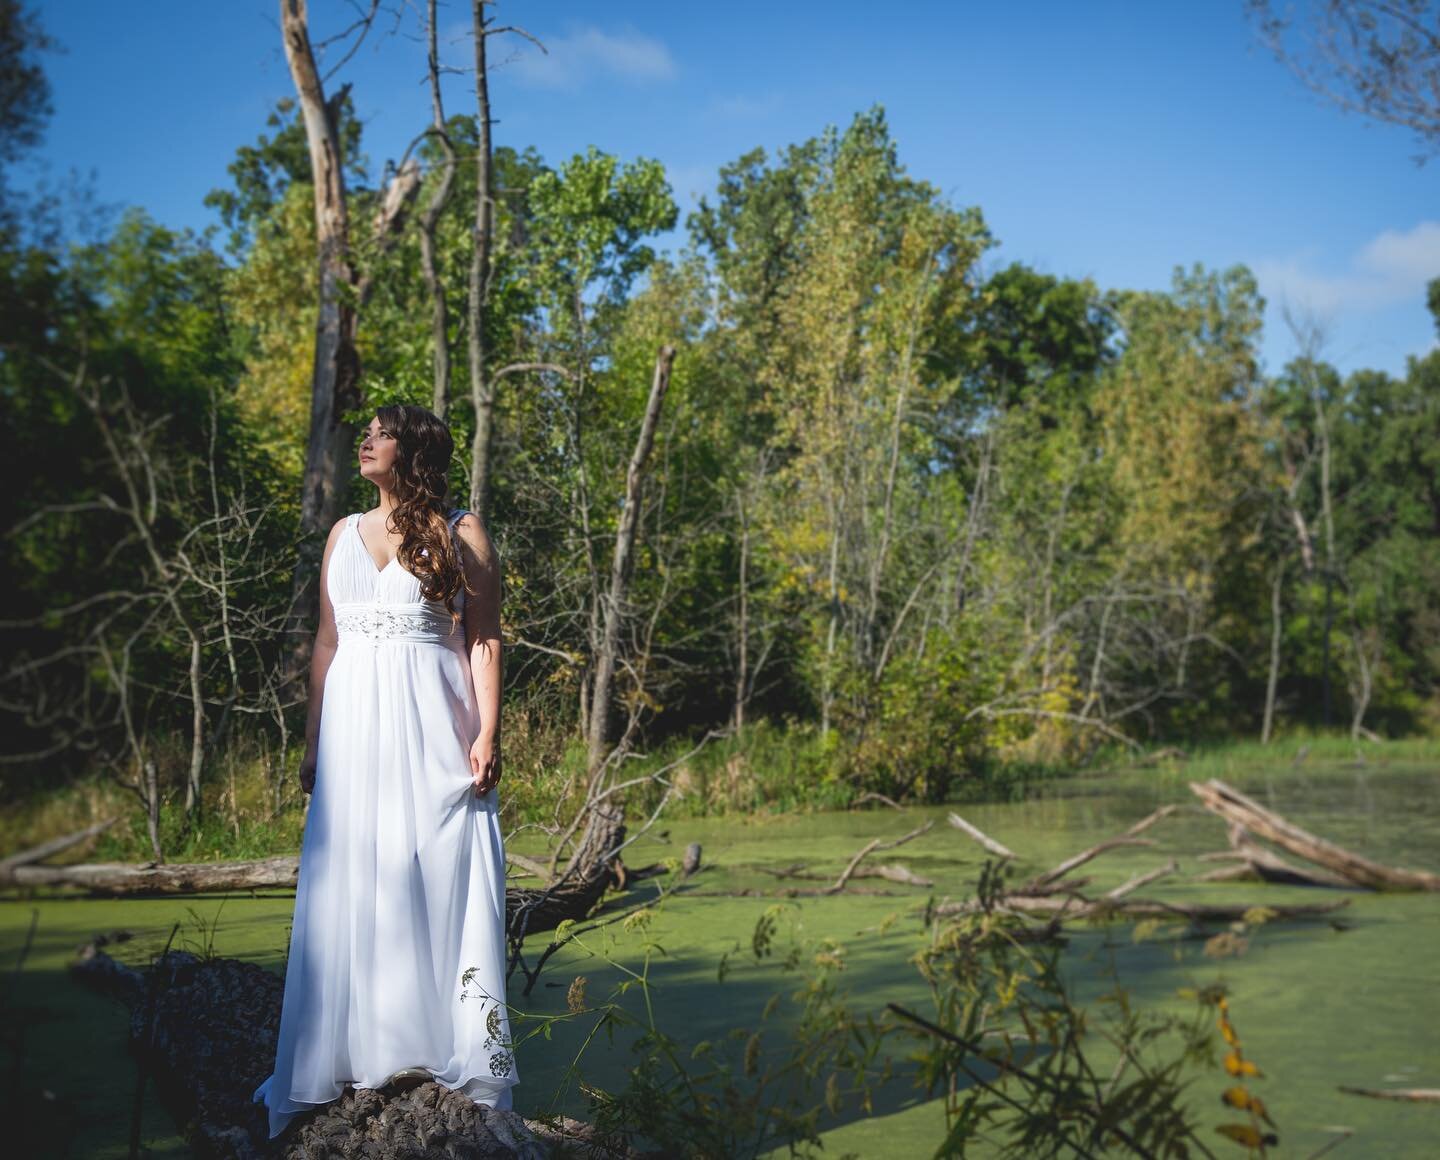 Melissa + Arron. Still cannot believe Melissa was down for standing on a log in a pond. Bravest bride every! Photo by @bc__photo @radphoto @figweddings #figweddings #weddingphotography #weddingphotoinspiration #chicagobrides #canonusa #chicagowedding